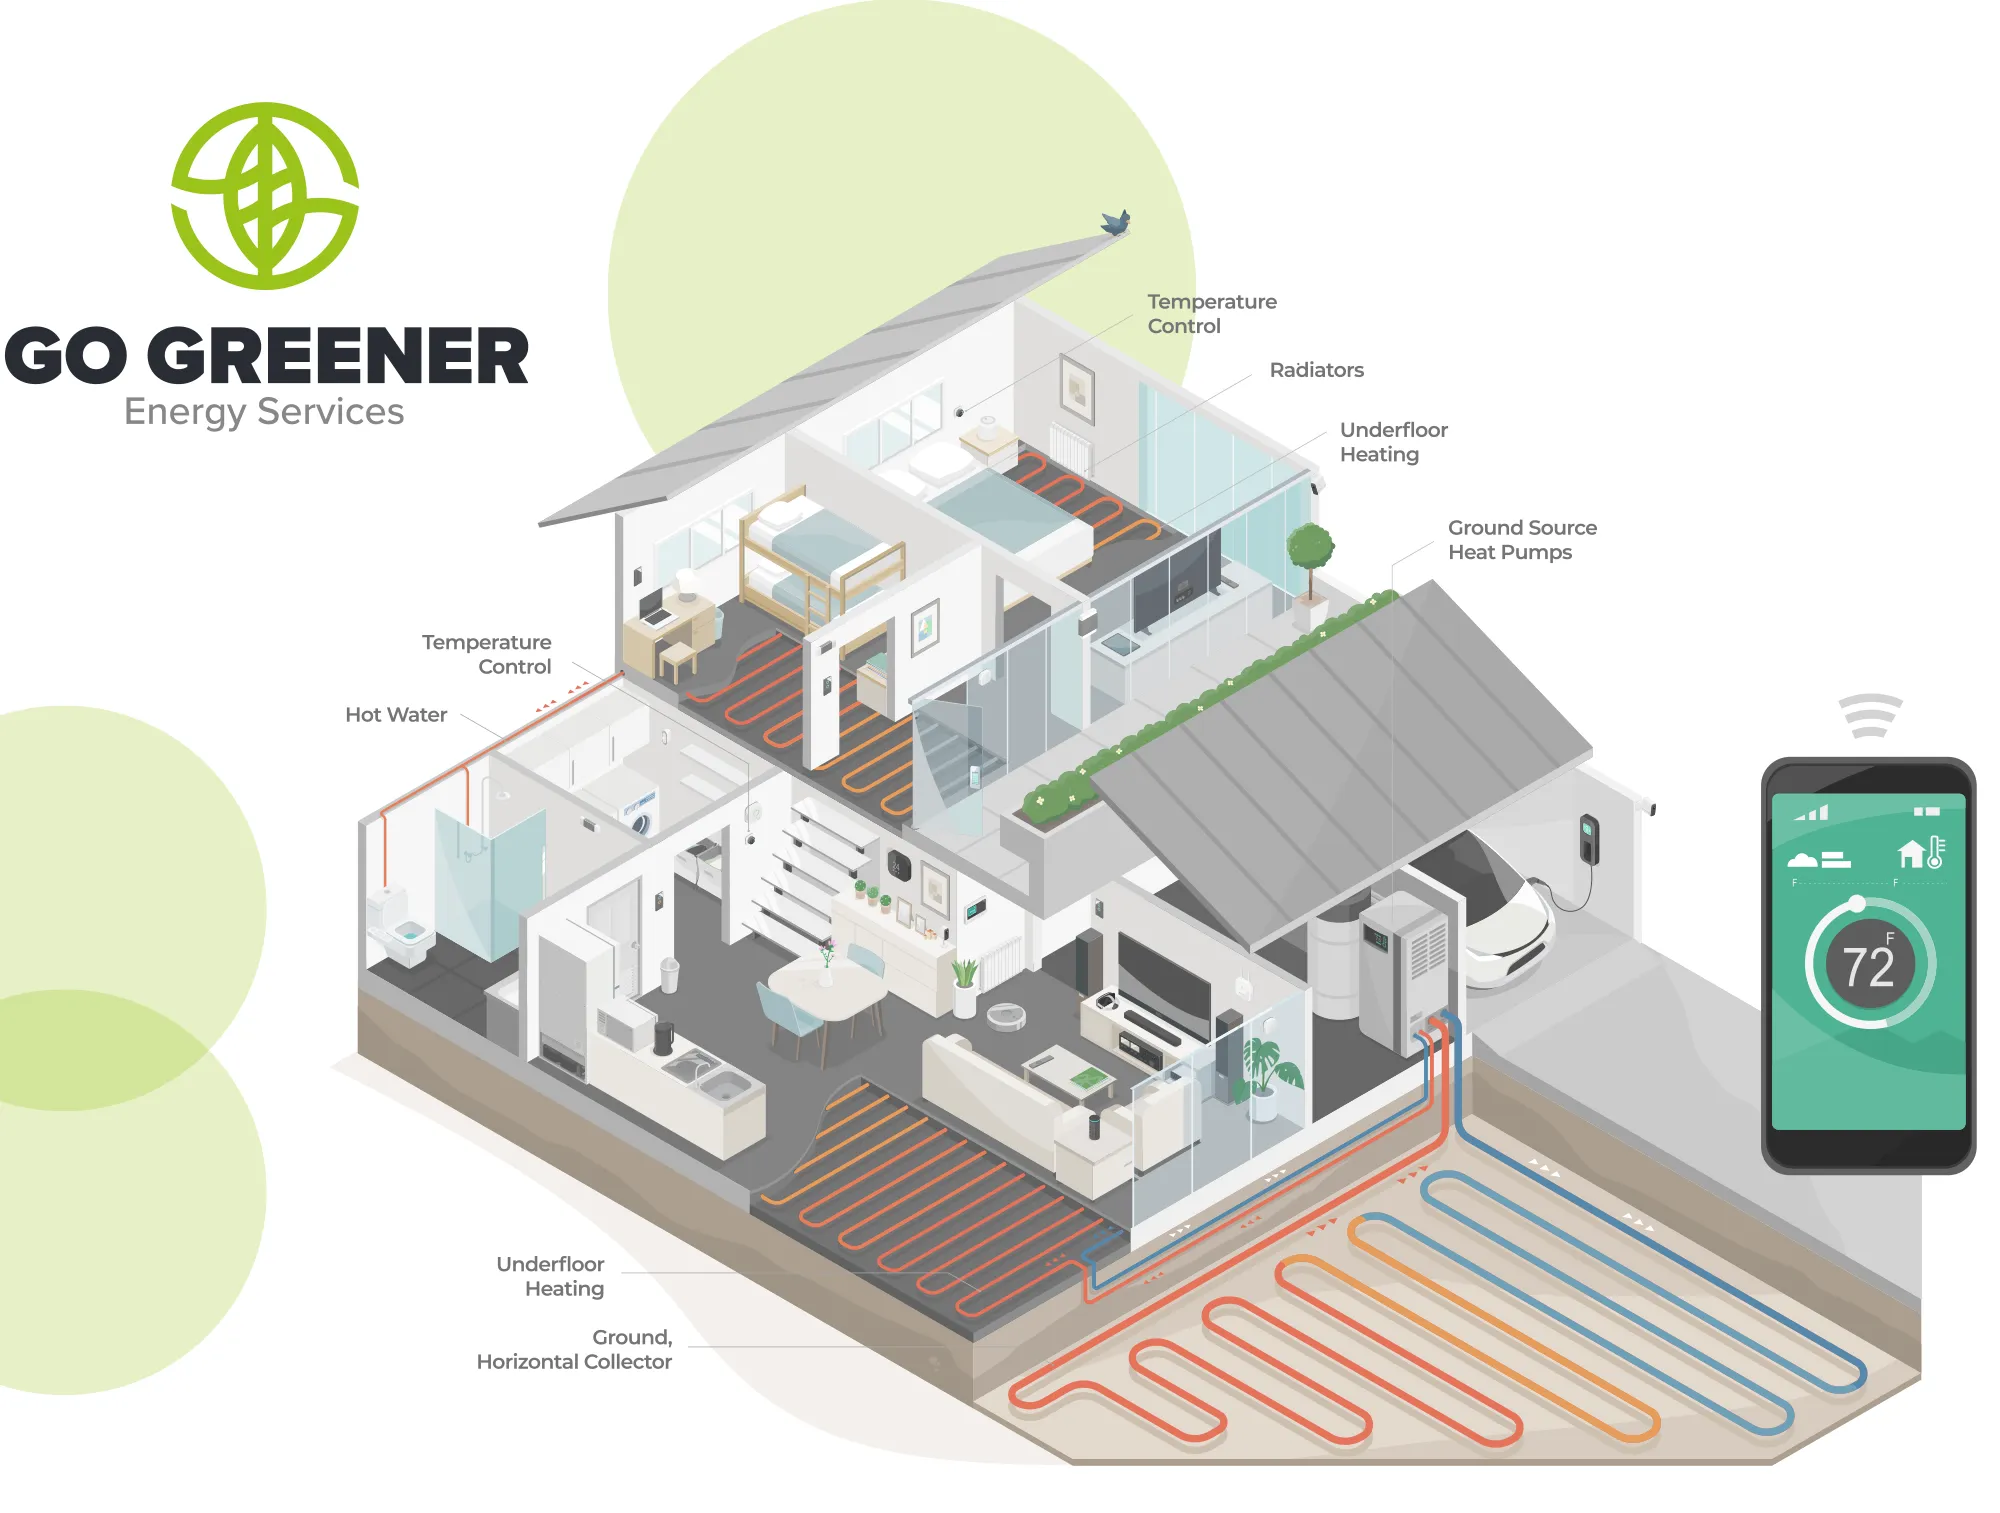 Ground Source Heat Pumps from Go Greener Energy Services